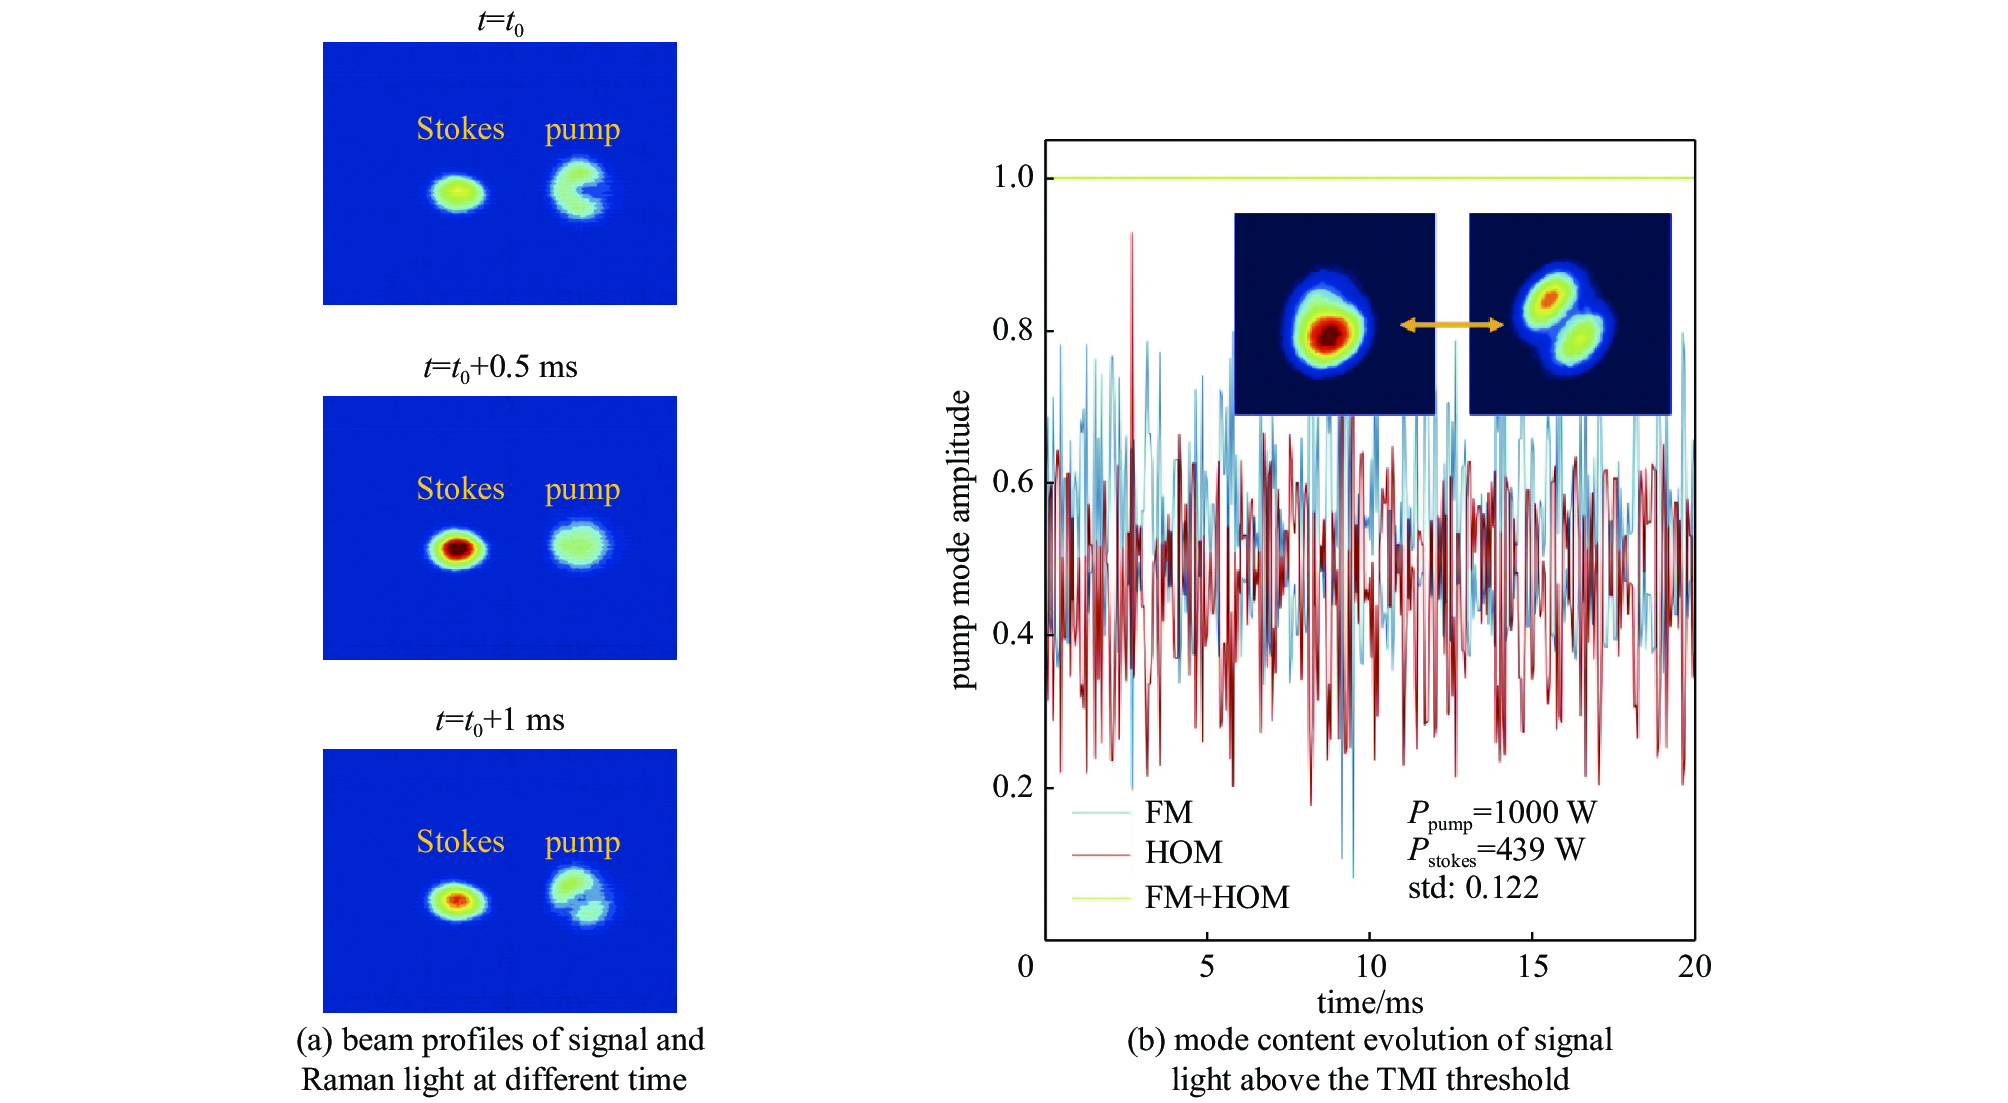 Transverse mode instability induced by stimulated Raman scattering[15-16]